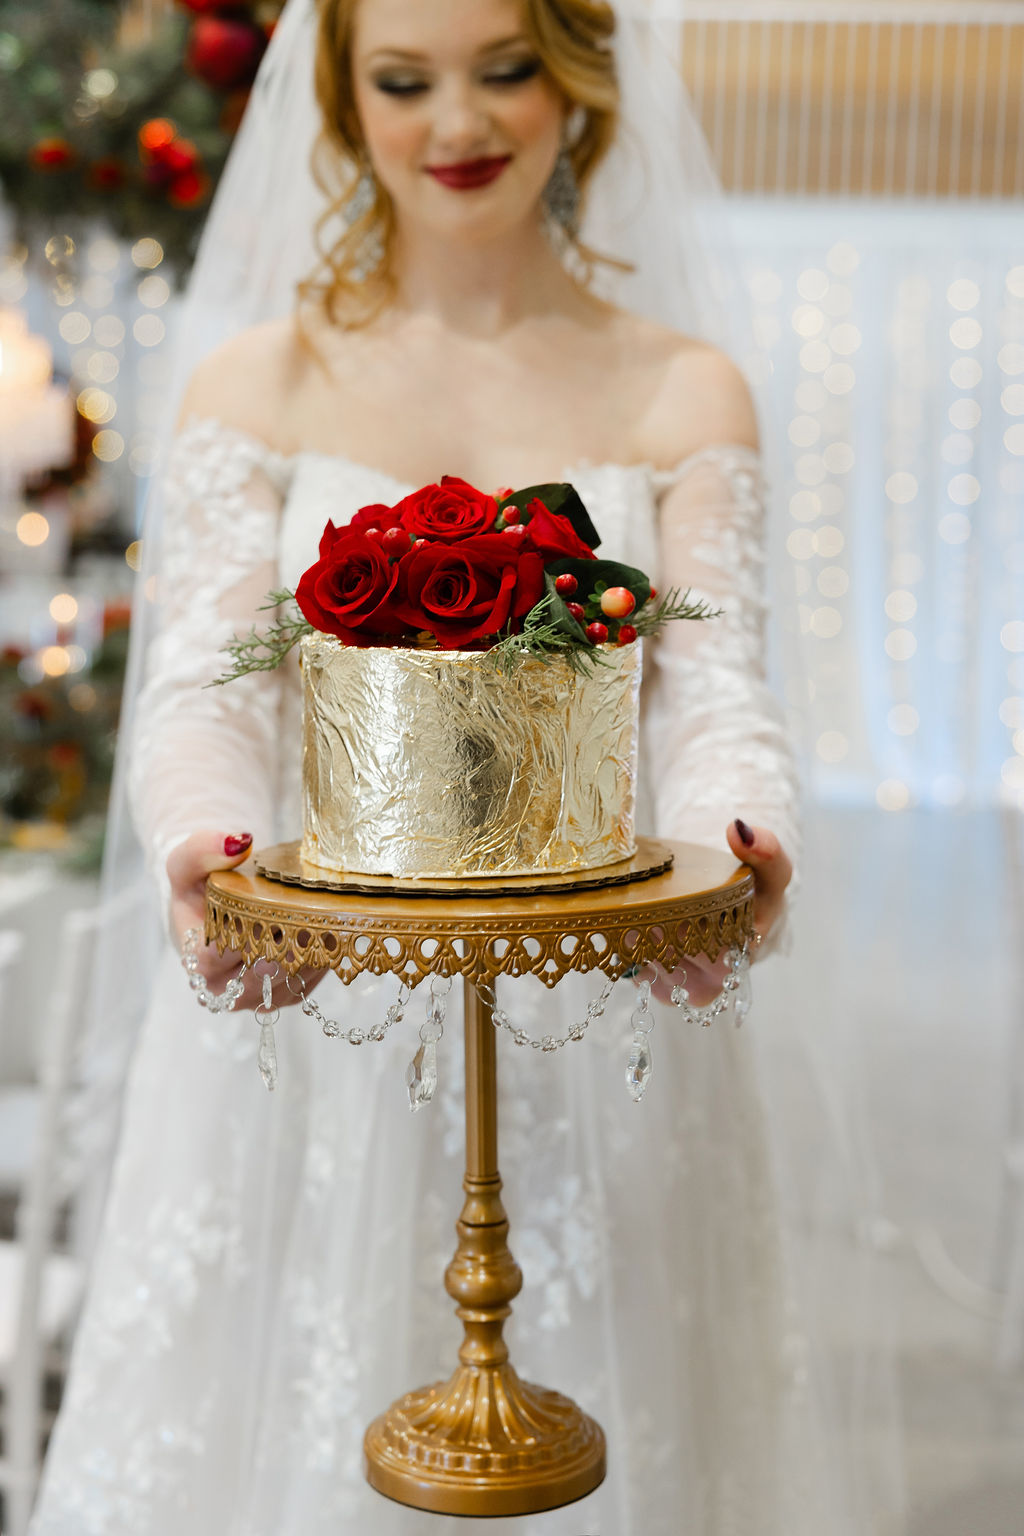  A Very Festive Wedding Day With Modern Styling